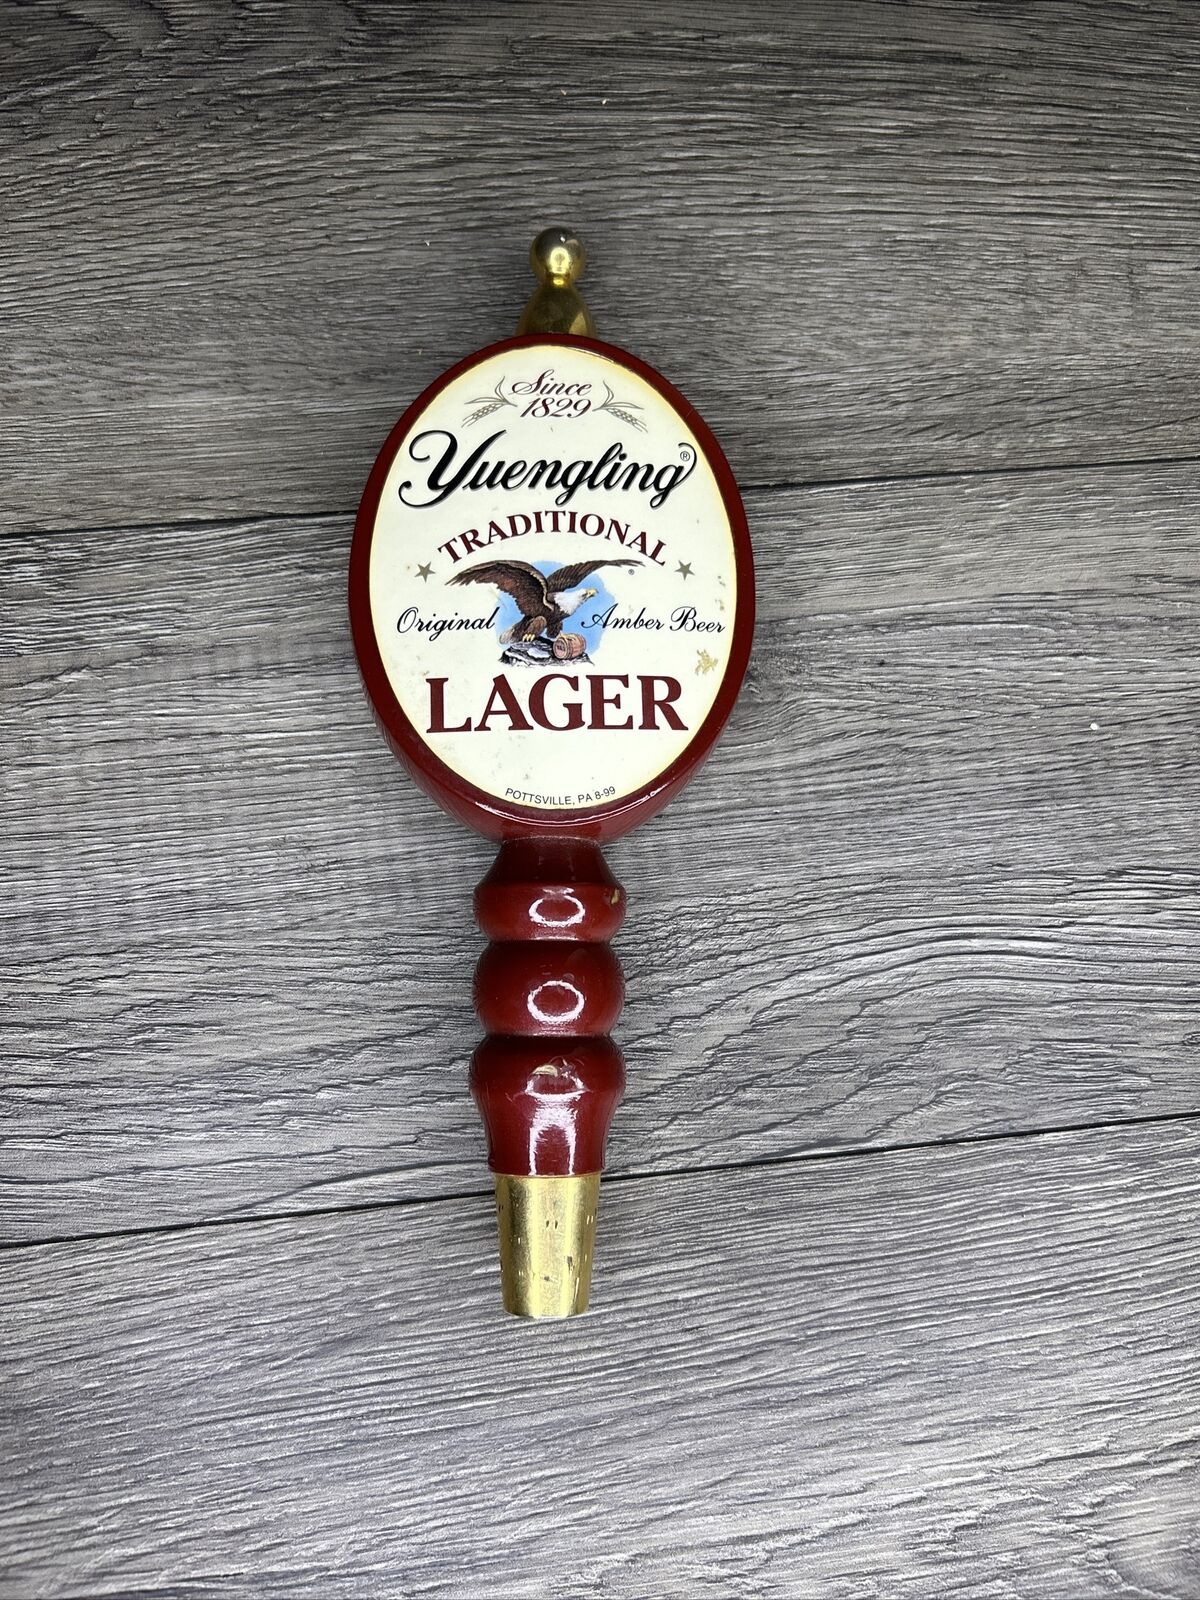 Yuengling Traditional Lager Original Amber Beer Tap Handle